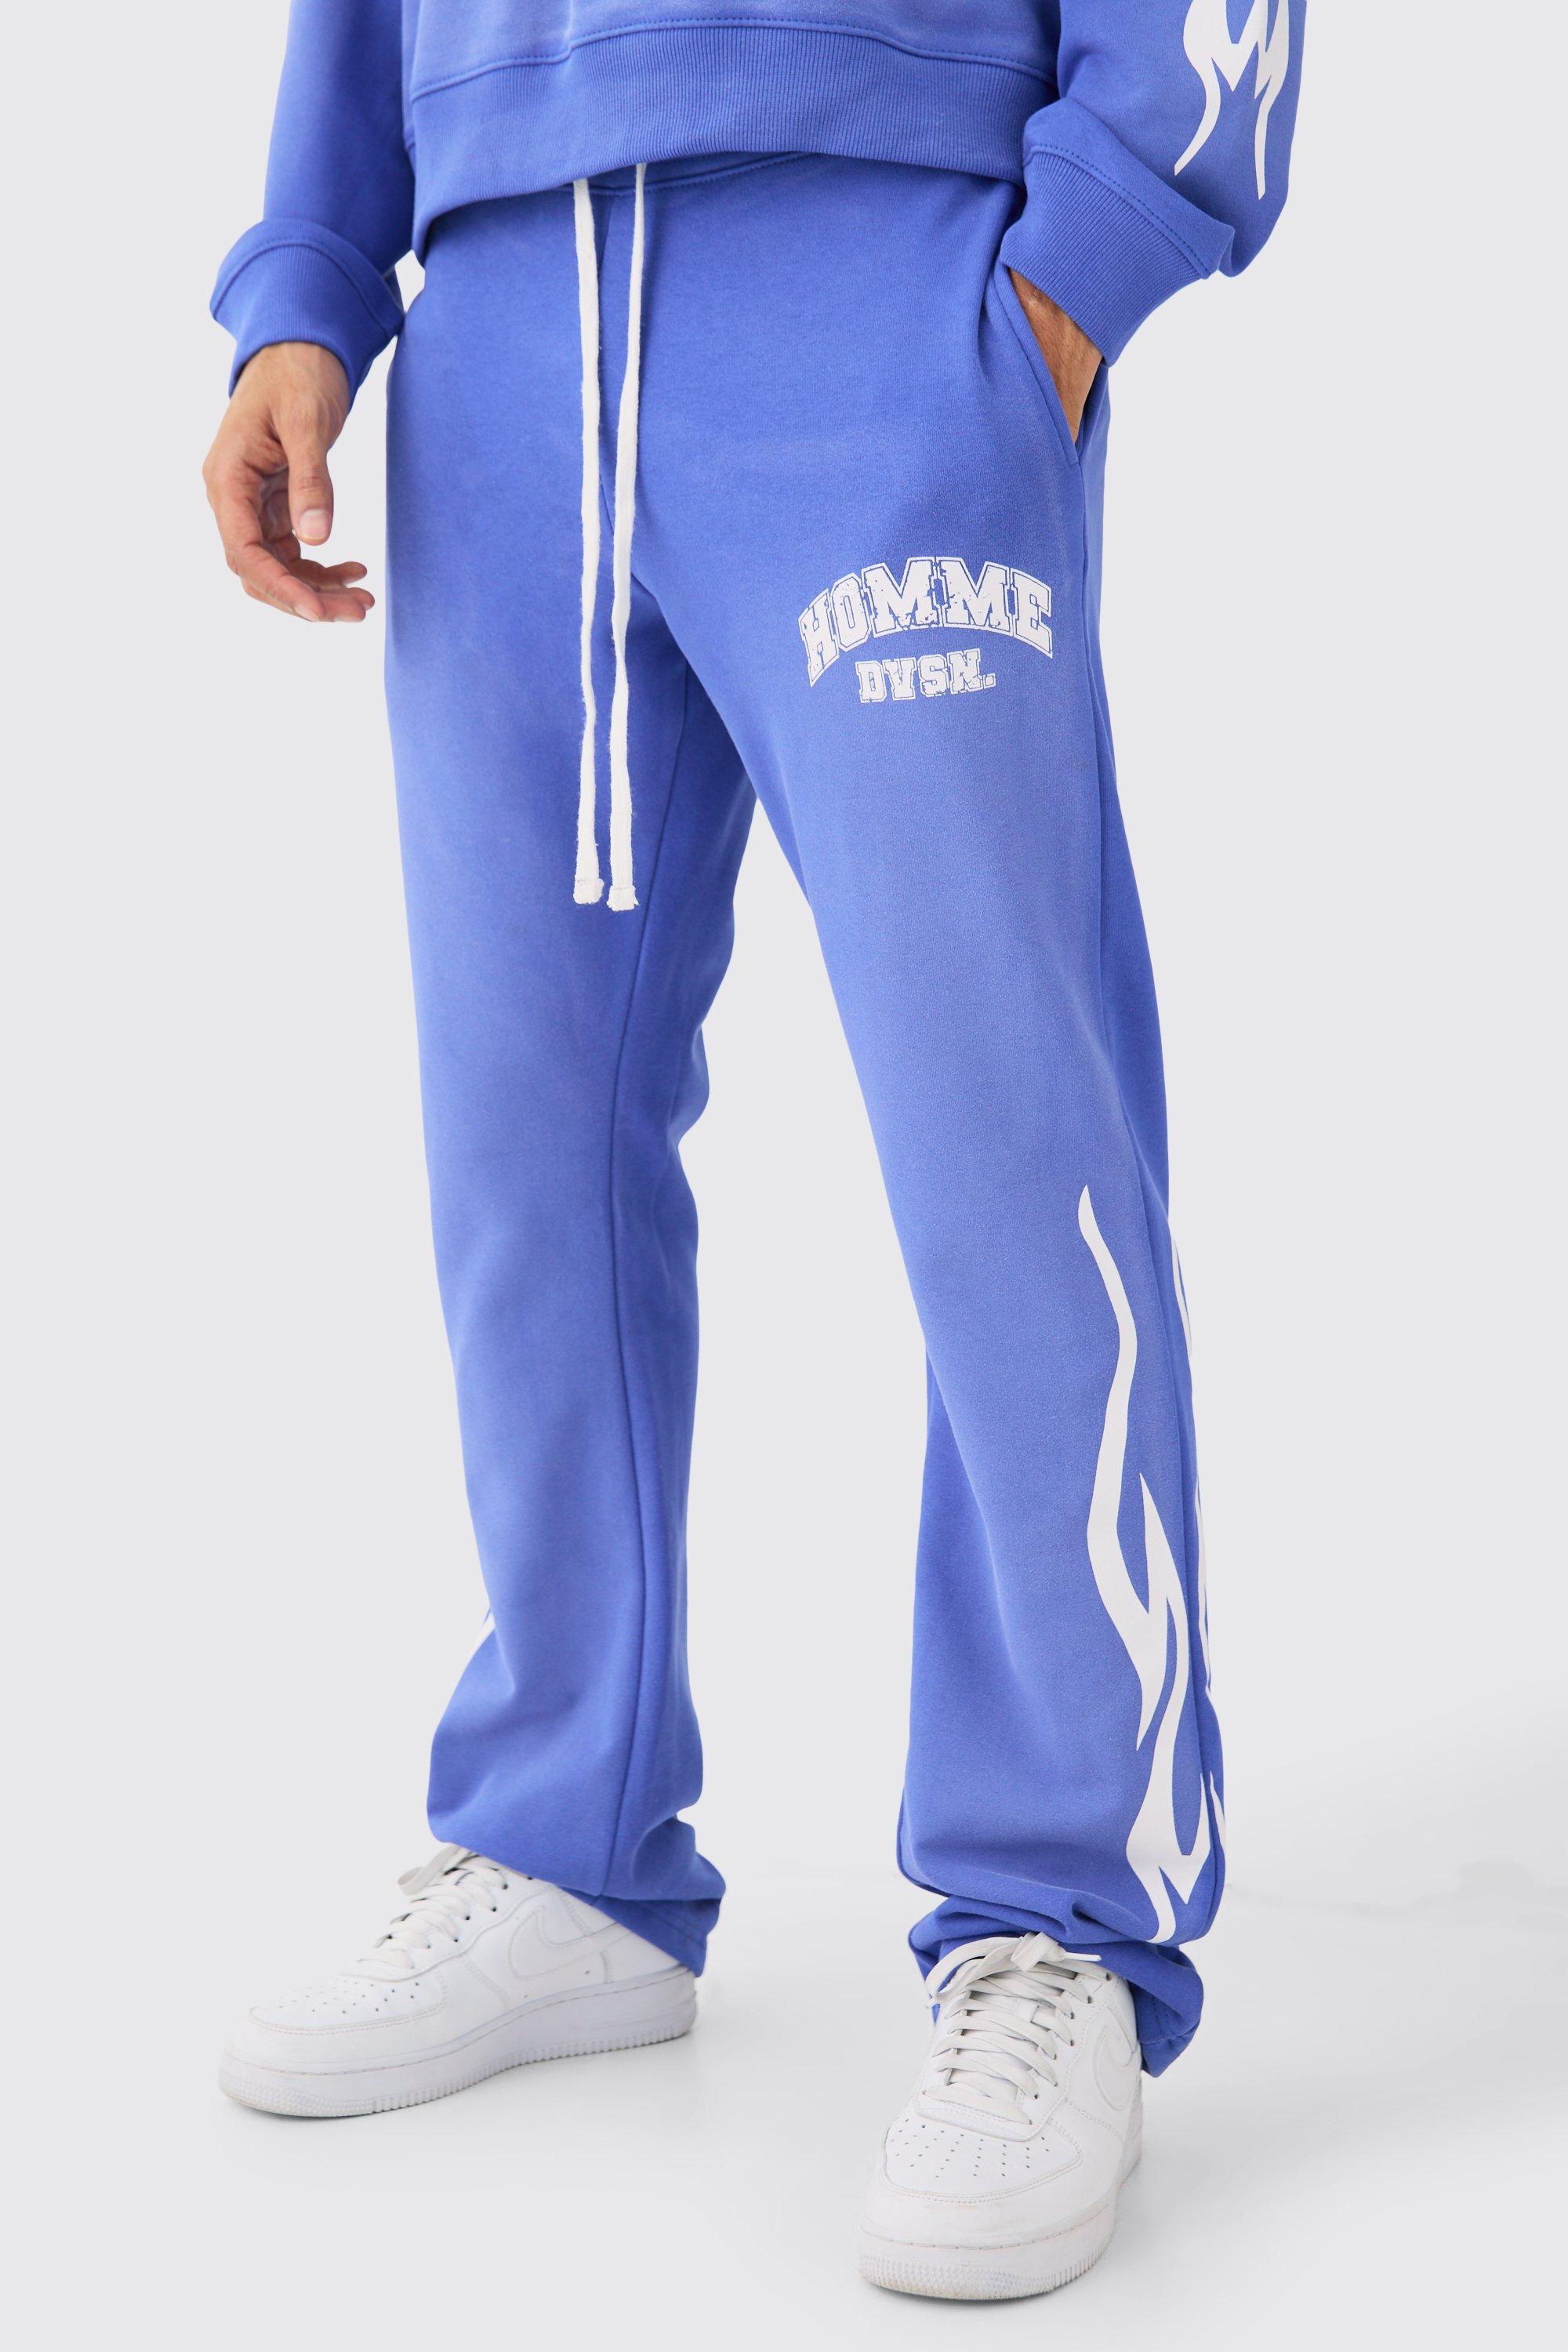 Image of Slim Flared Stacked Spray Wash Homme Joggers, Azzurro